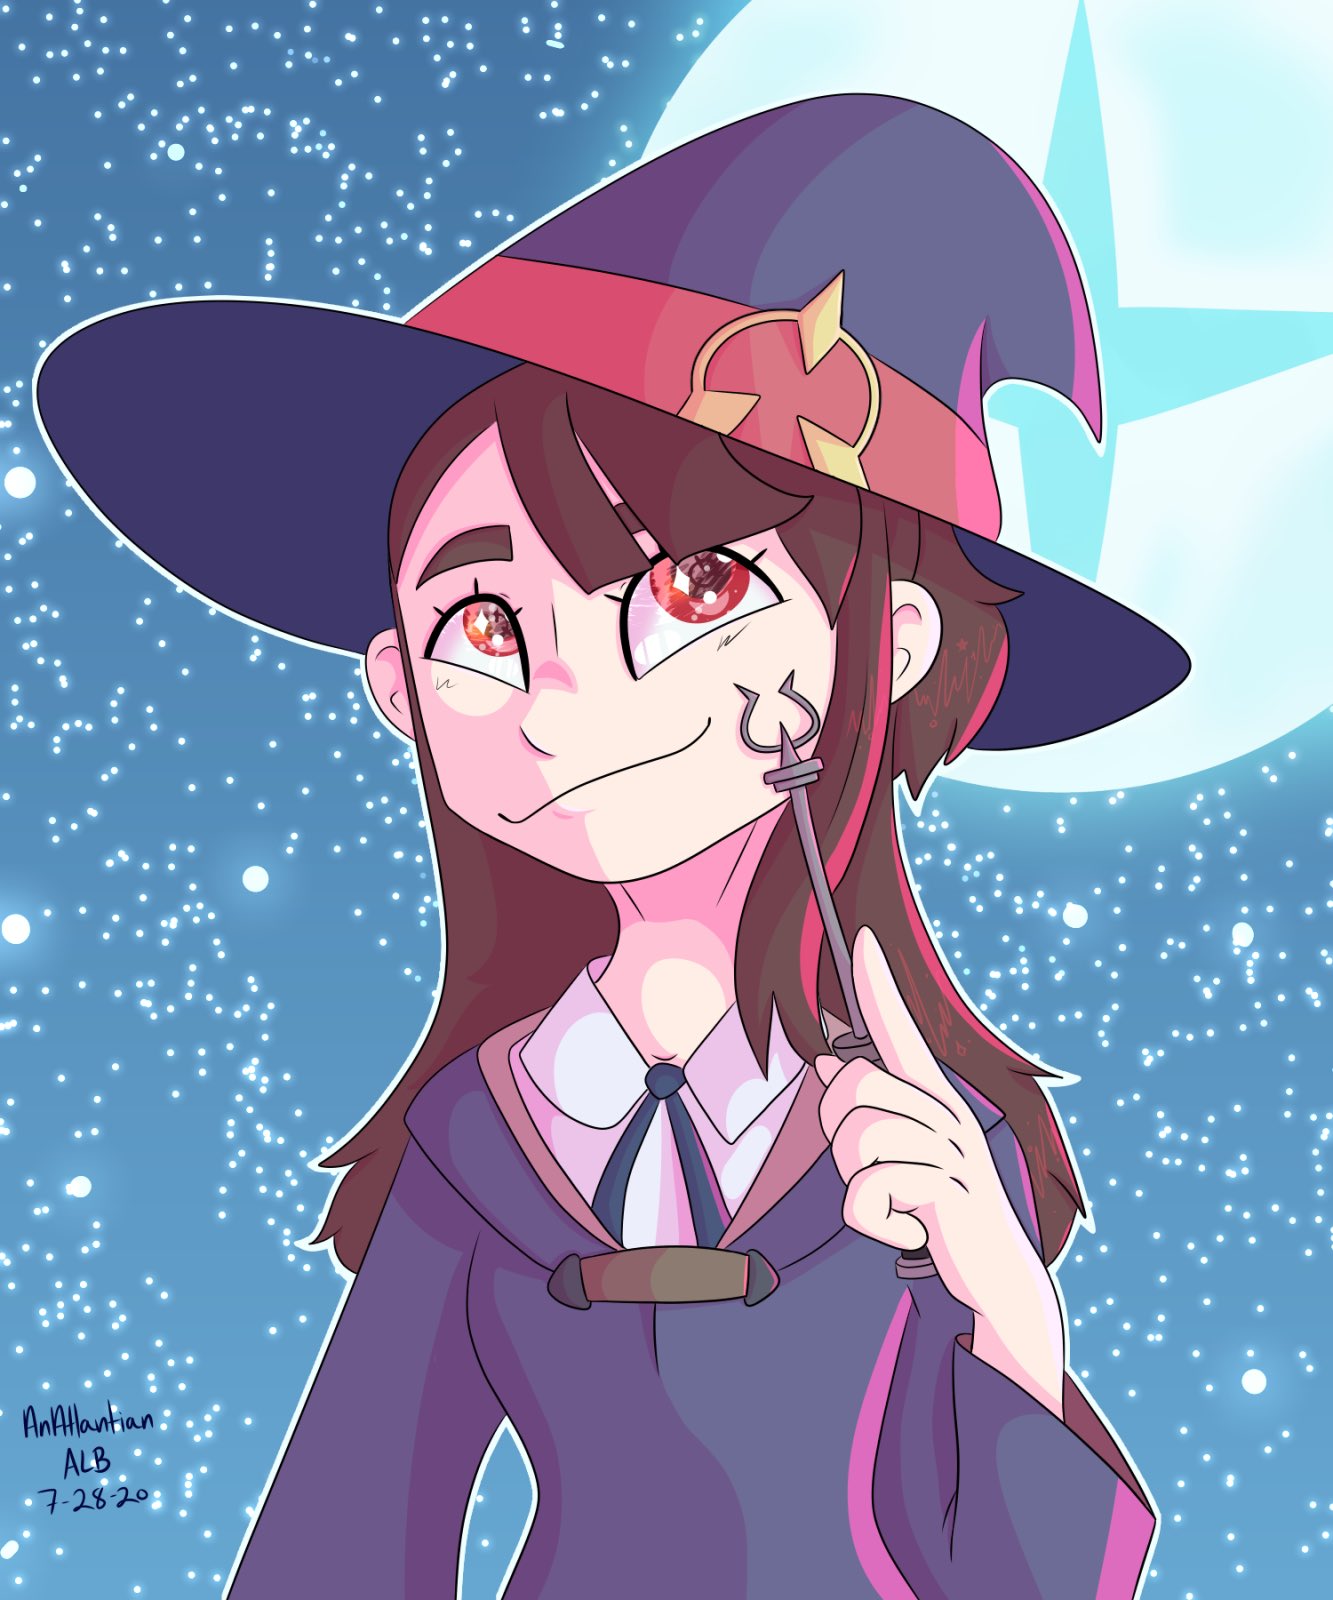 Little Witch Academia Actor Teases New Anime